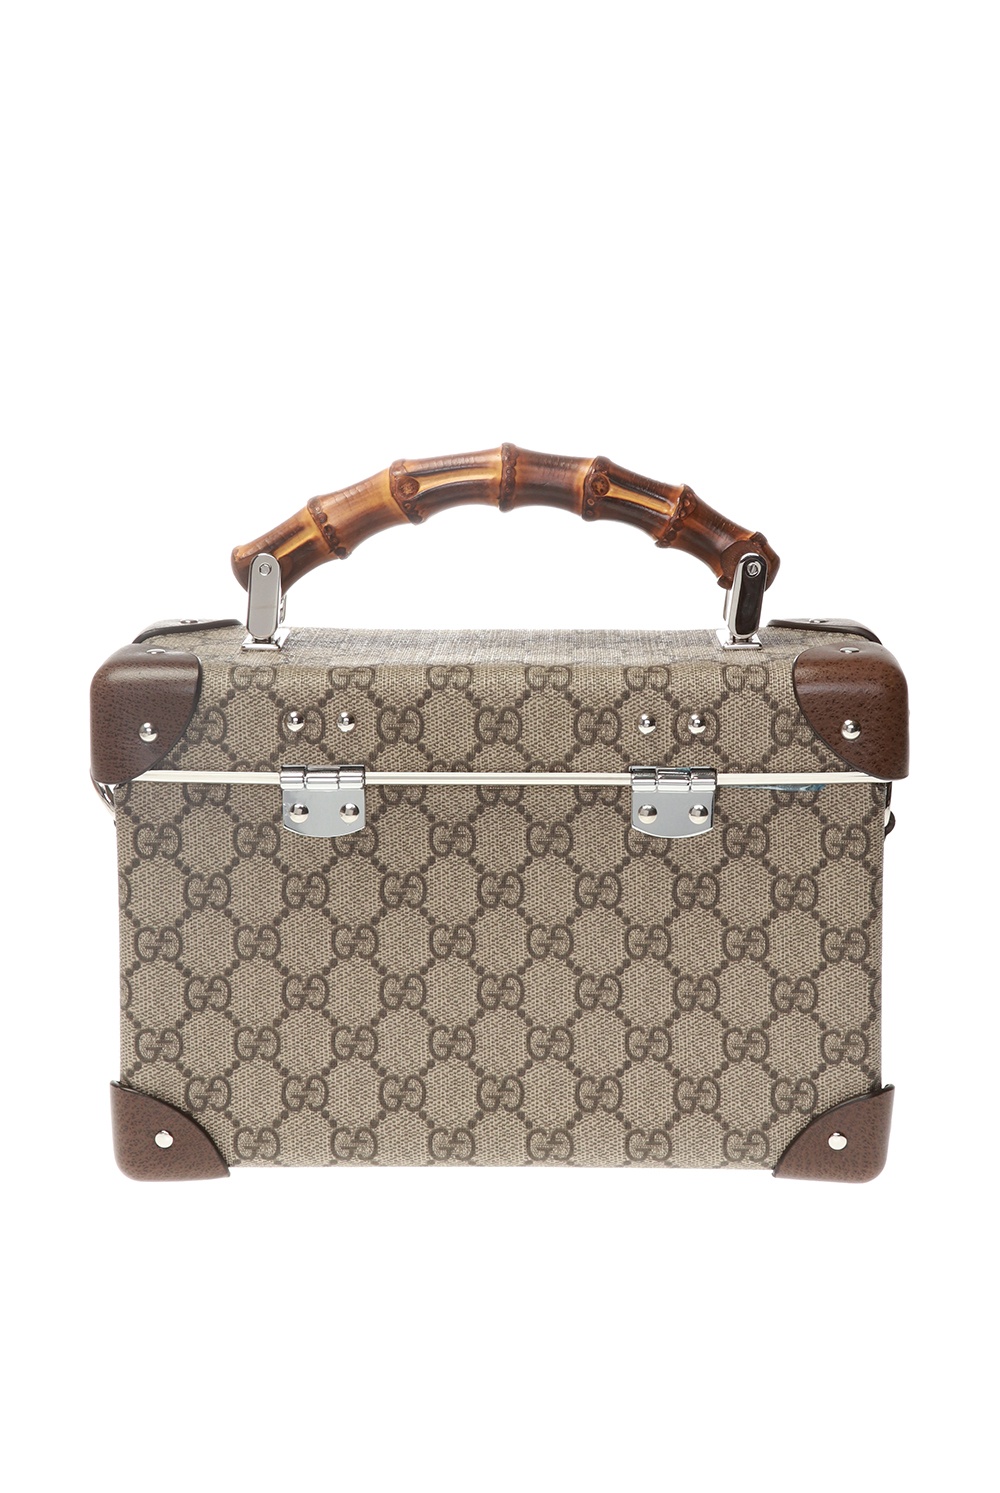 Gucci Trunk - 10 For Sale on 1stDibs  gucci chest, gucci trunk bag, gucci  chest bag